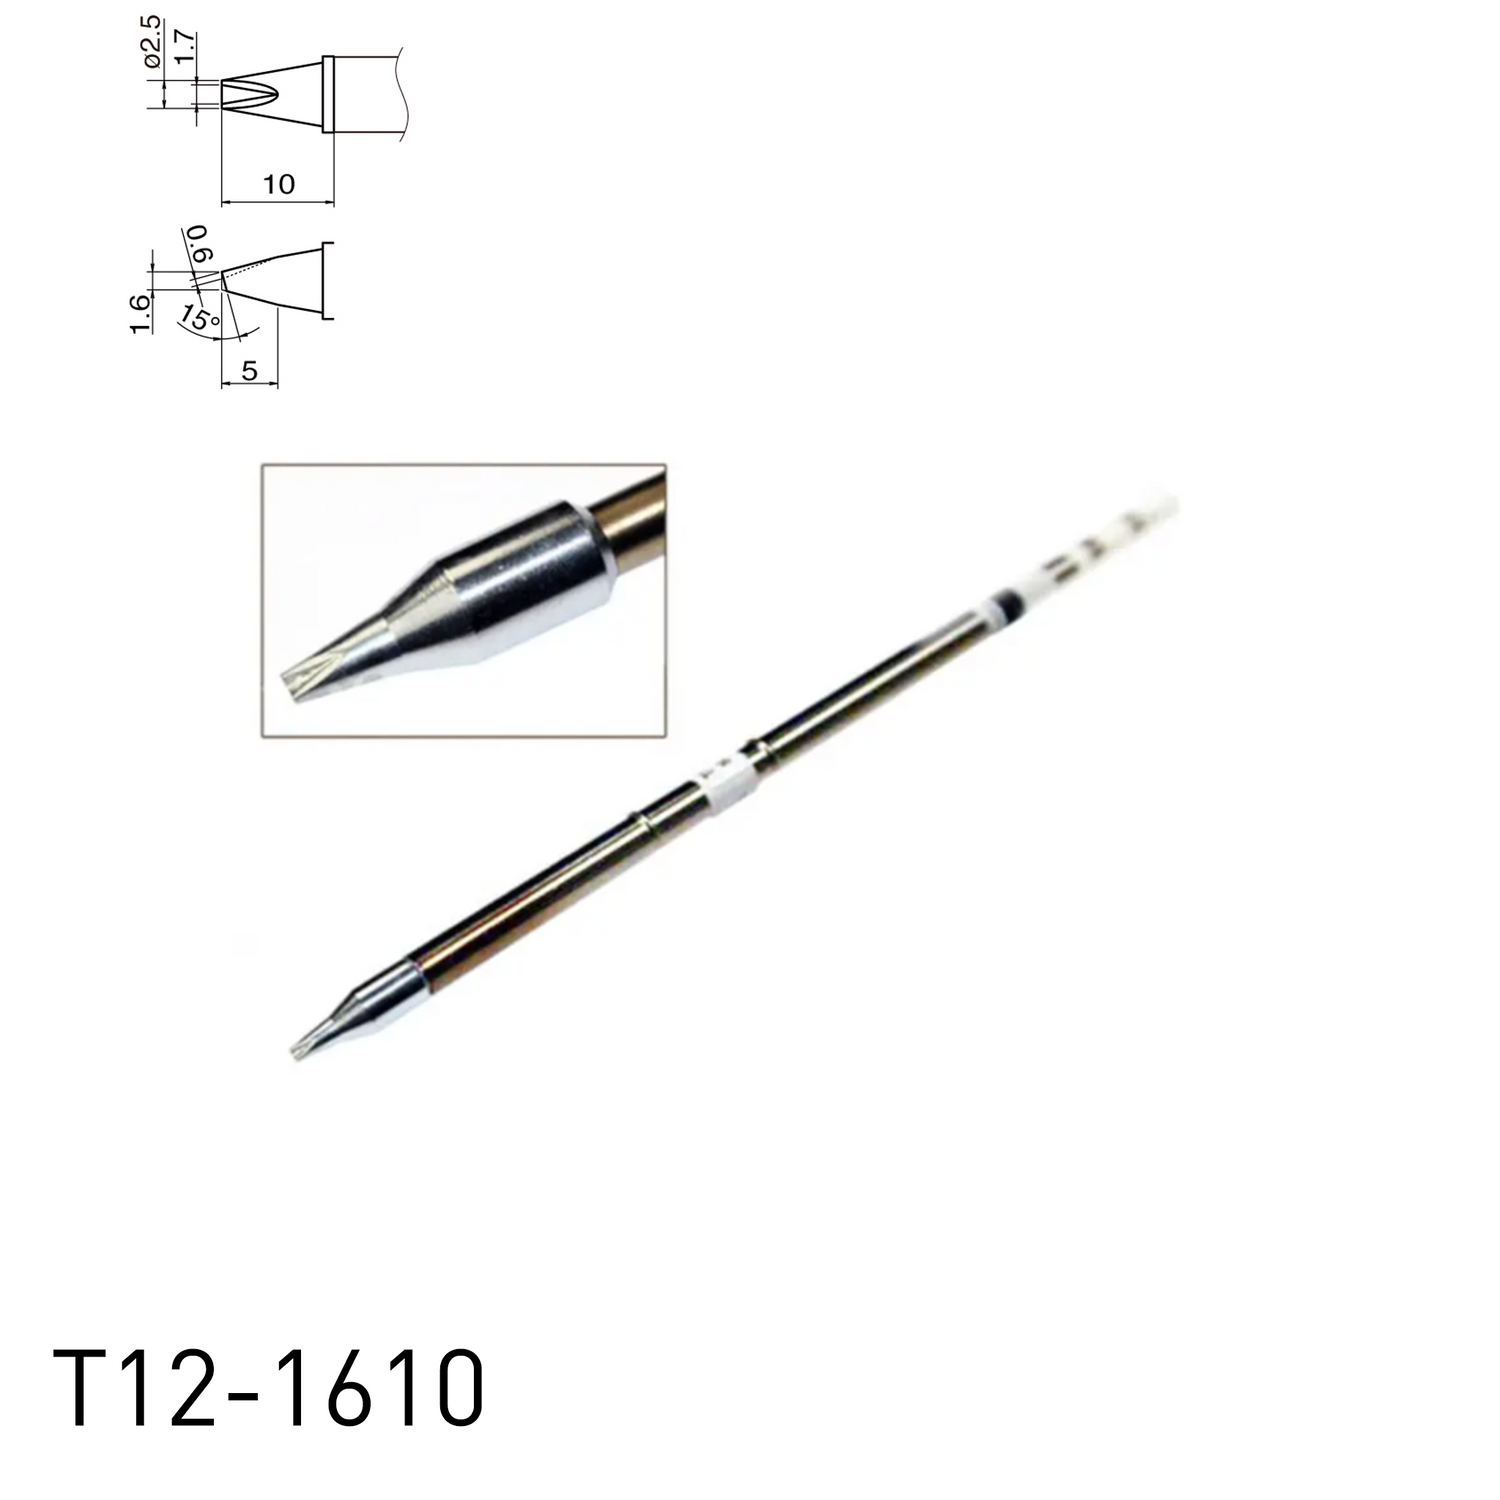 Hakko T12-1610 with V-groove Shape Concave Soldering Iron Tips for soldering station FM202, FM203, FM204, FM206, FM950, FX951, FX952 and soldering iron FM2027, FM2028